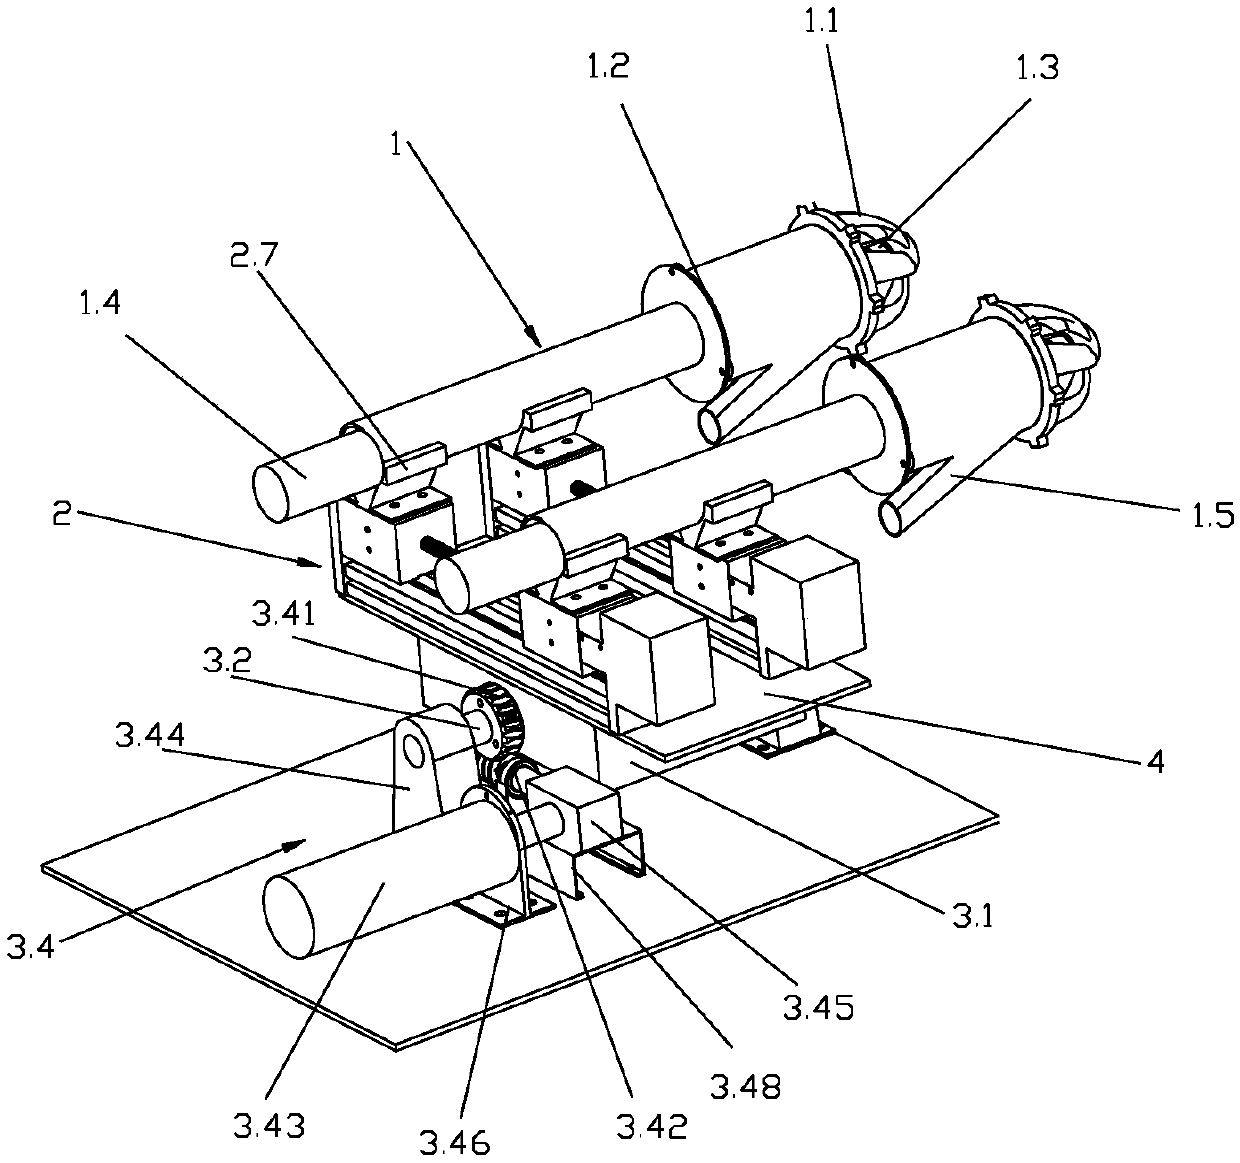 Adaptive double reamer dredging device